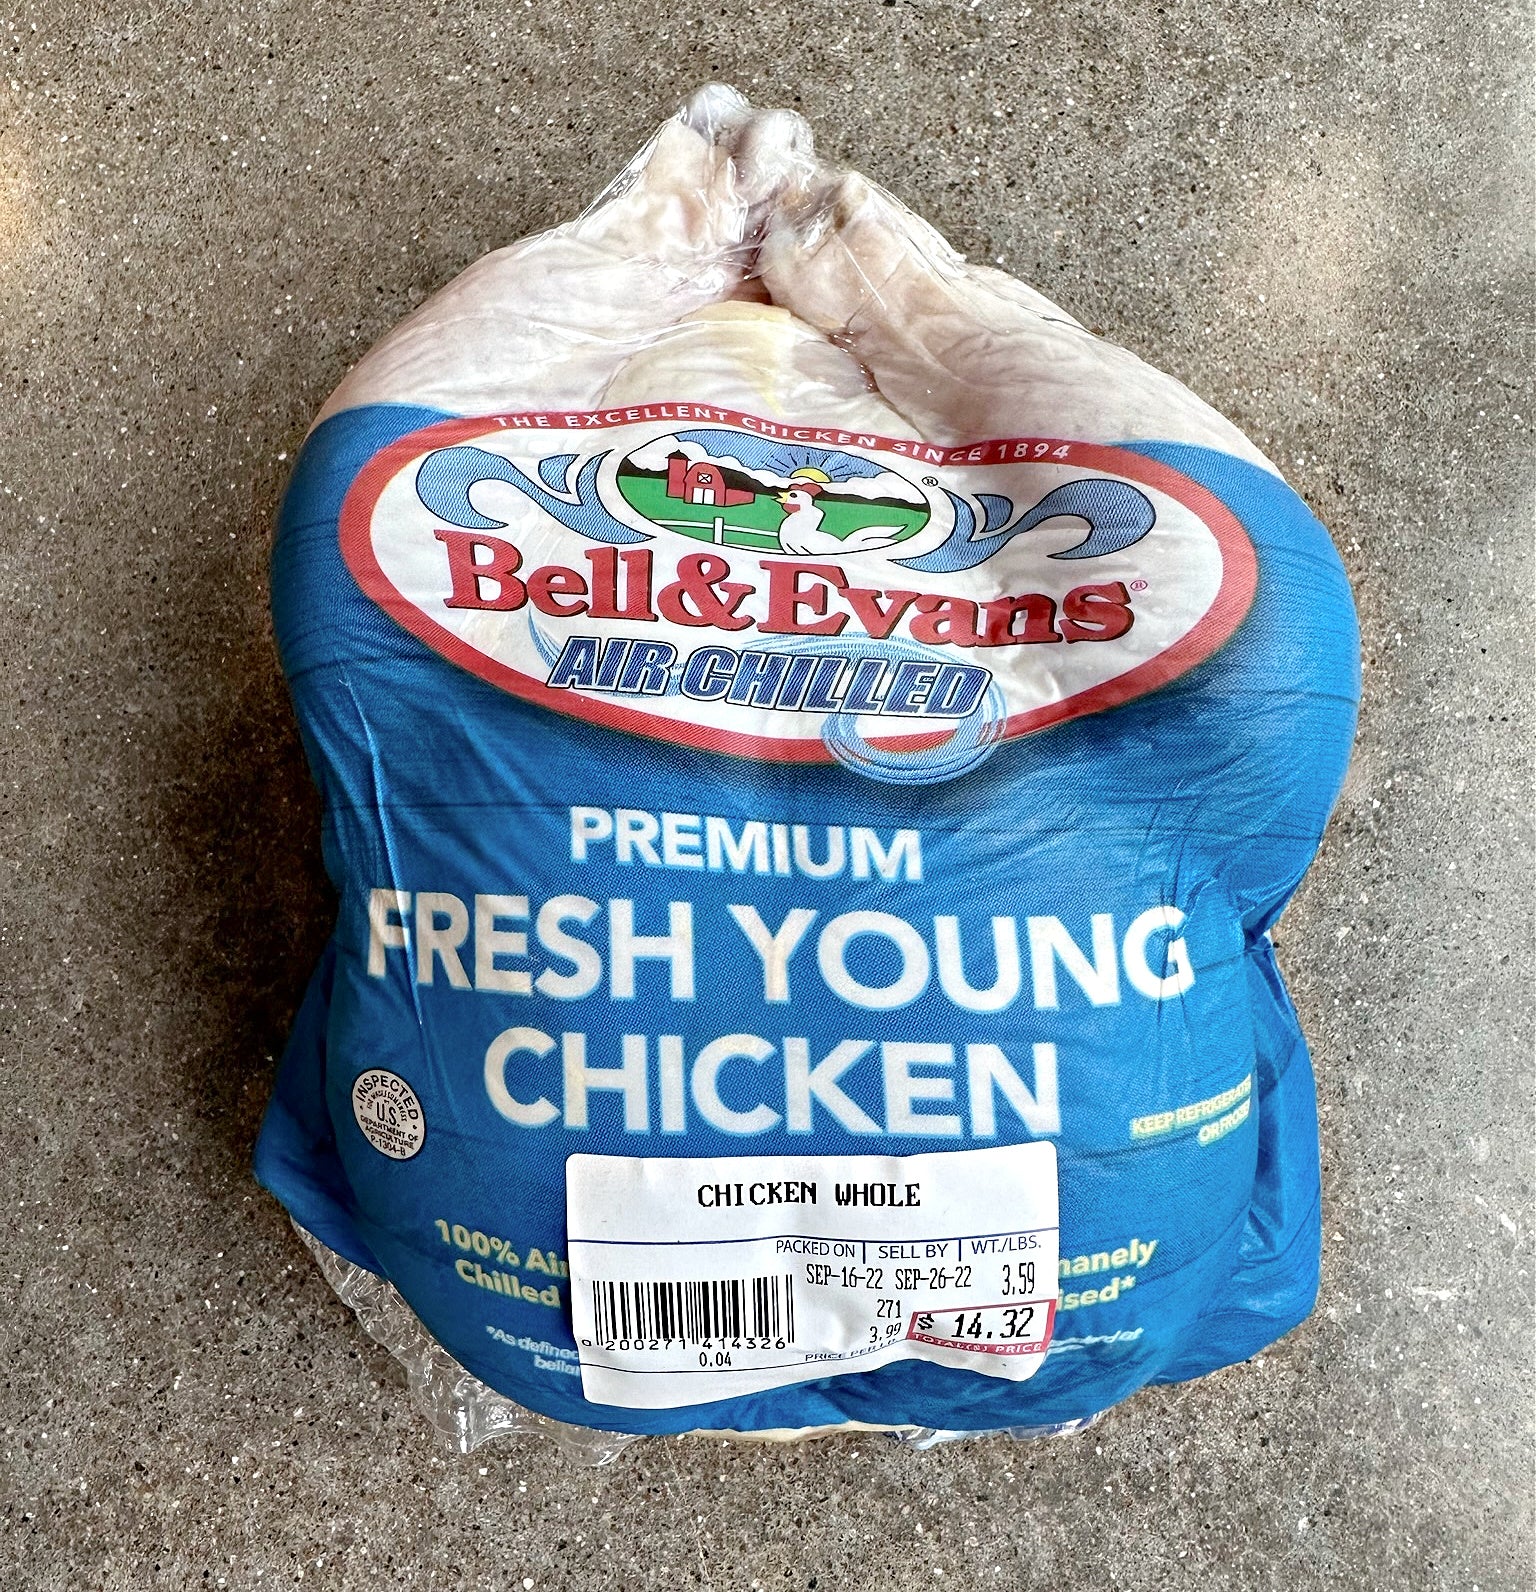 All Natural Whole Chicken